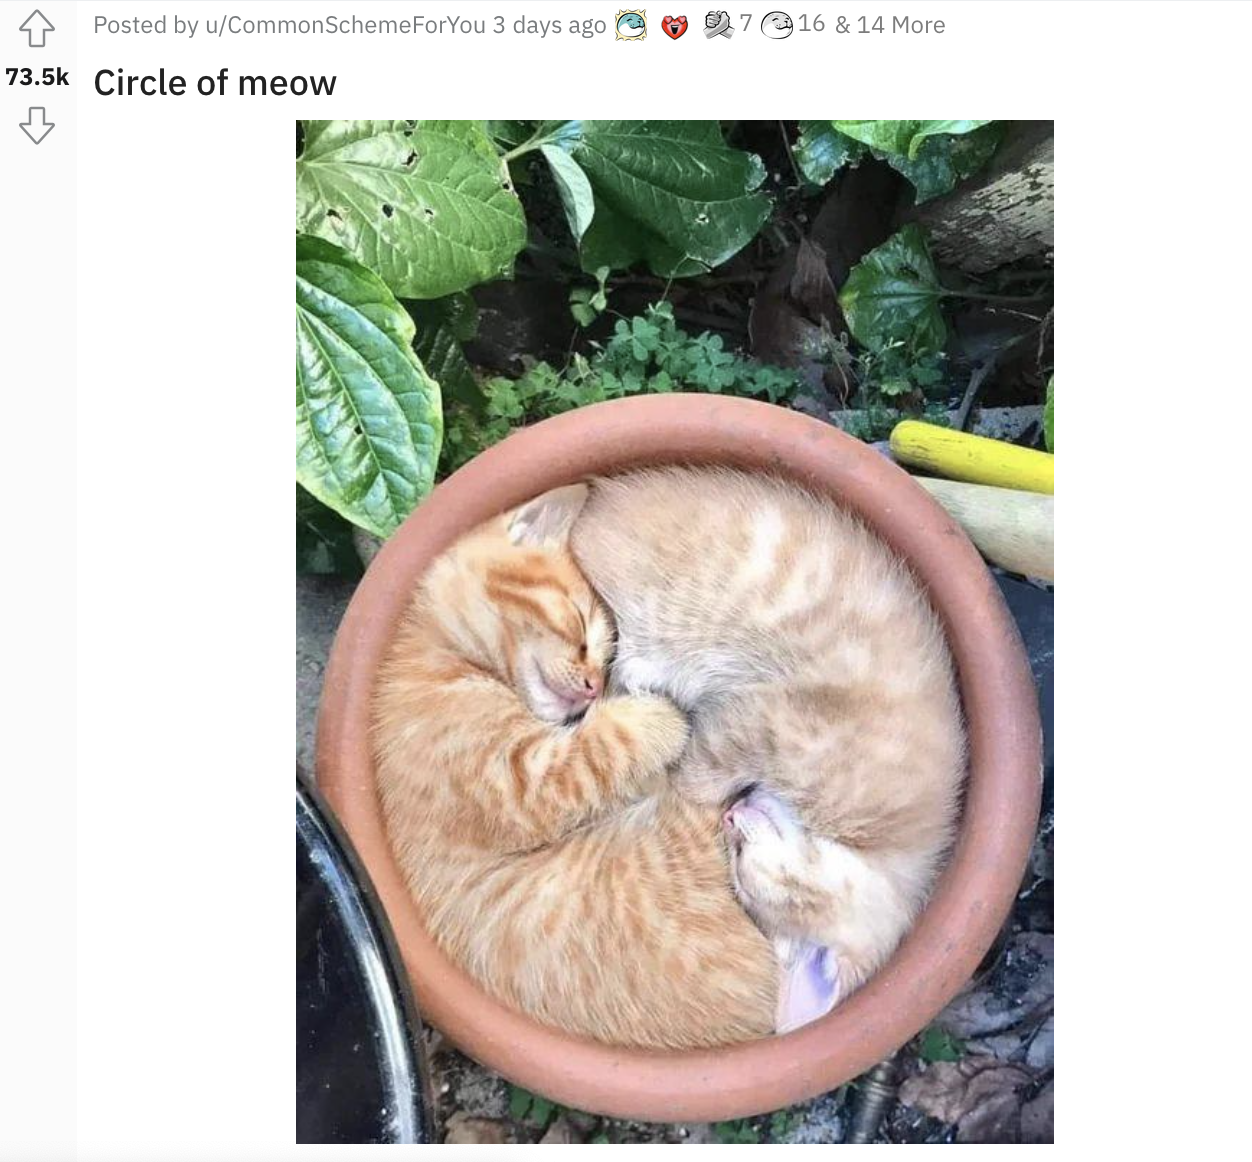 Two kittens in a pot